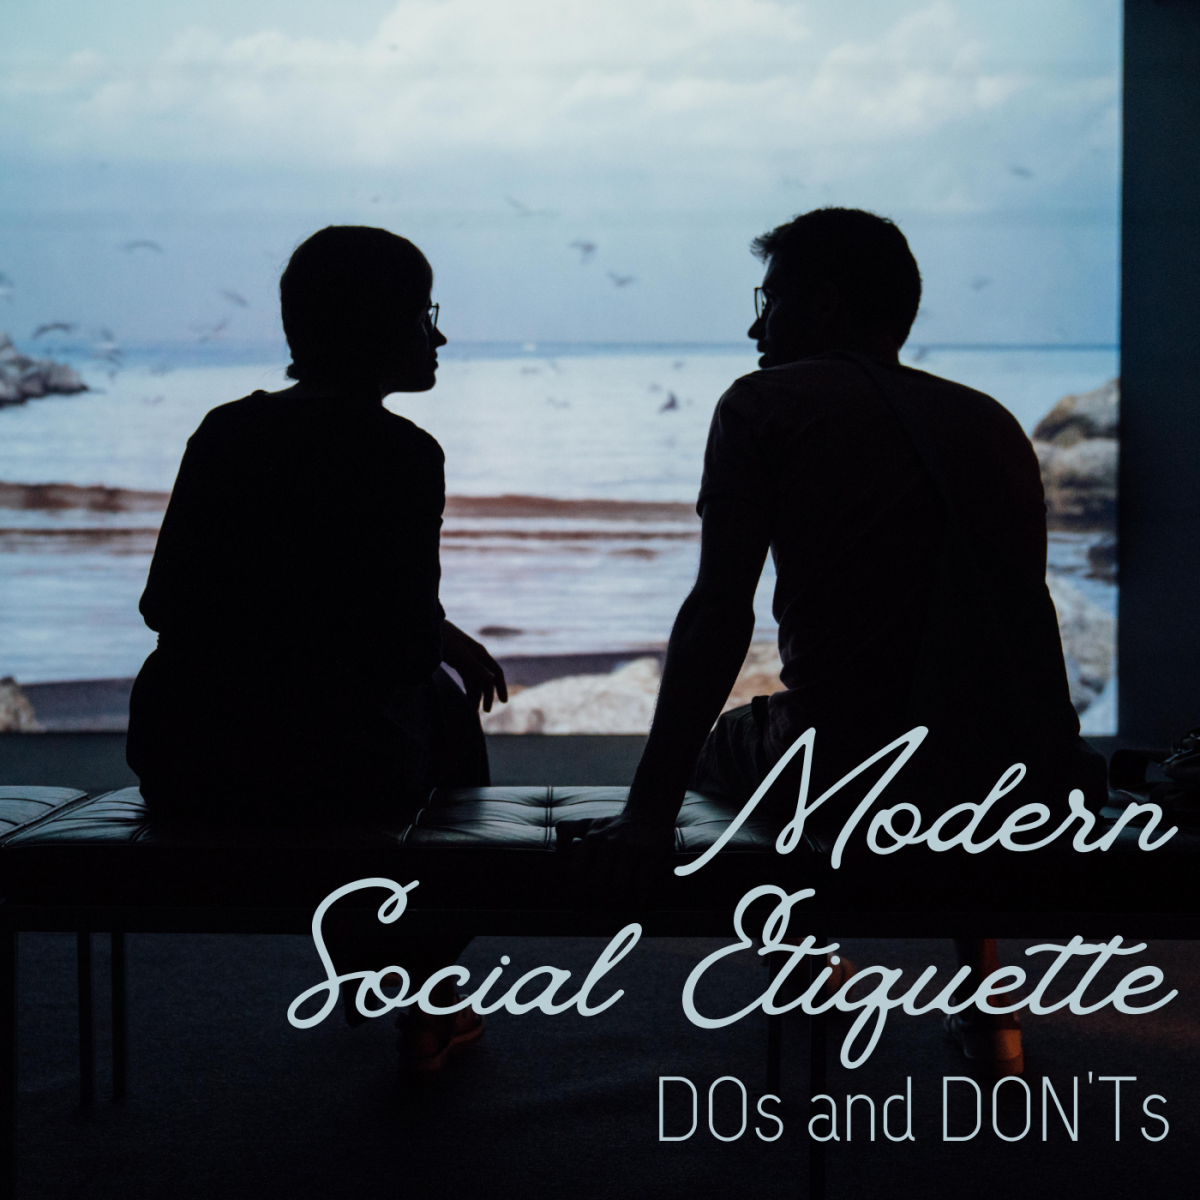 Get some tips on proper etiquette in the modern world!